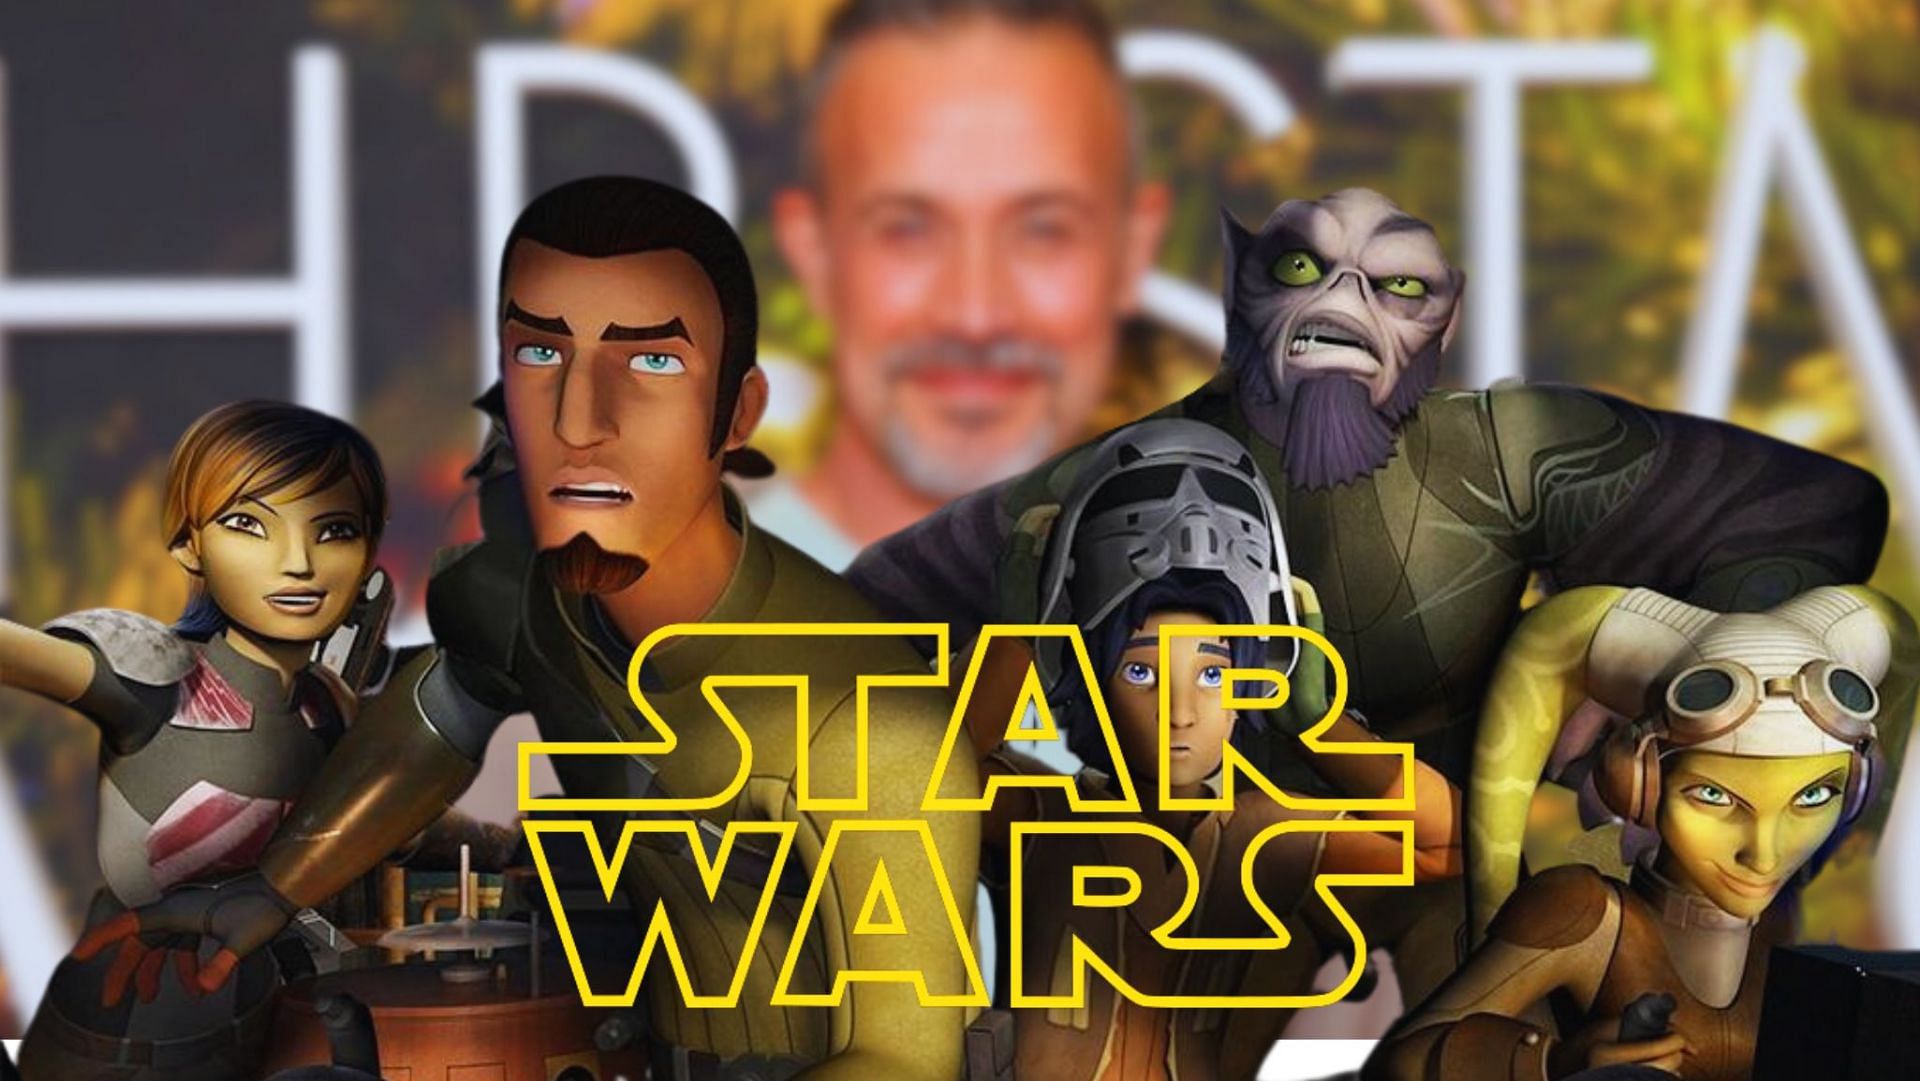 Freddie Prinze Jr. voices Kanan Jarrus in Star Wars: Rebels, a character he was forced to return to despite his reluctance (Image via Sportskeeda)